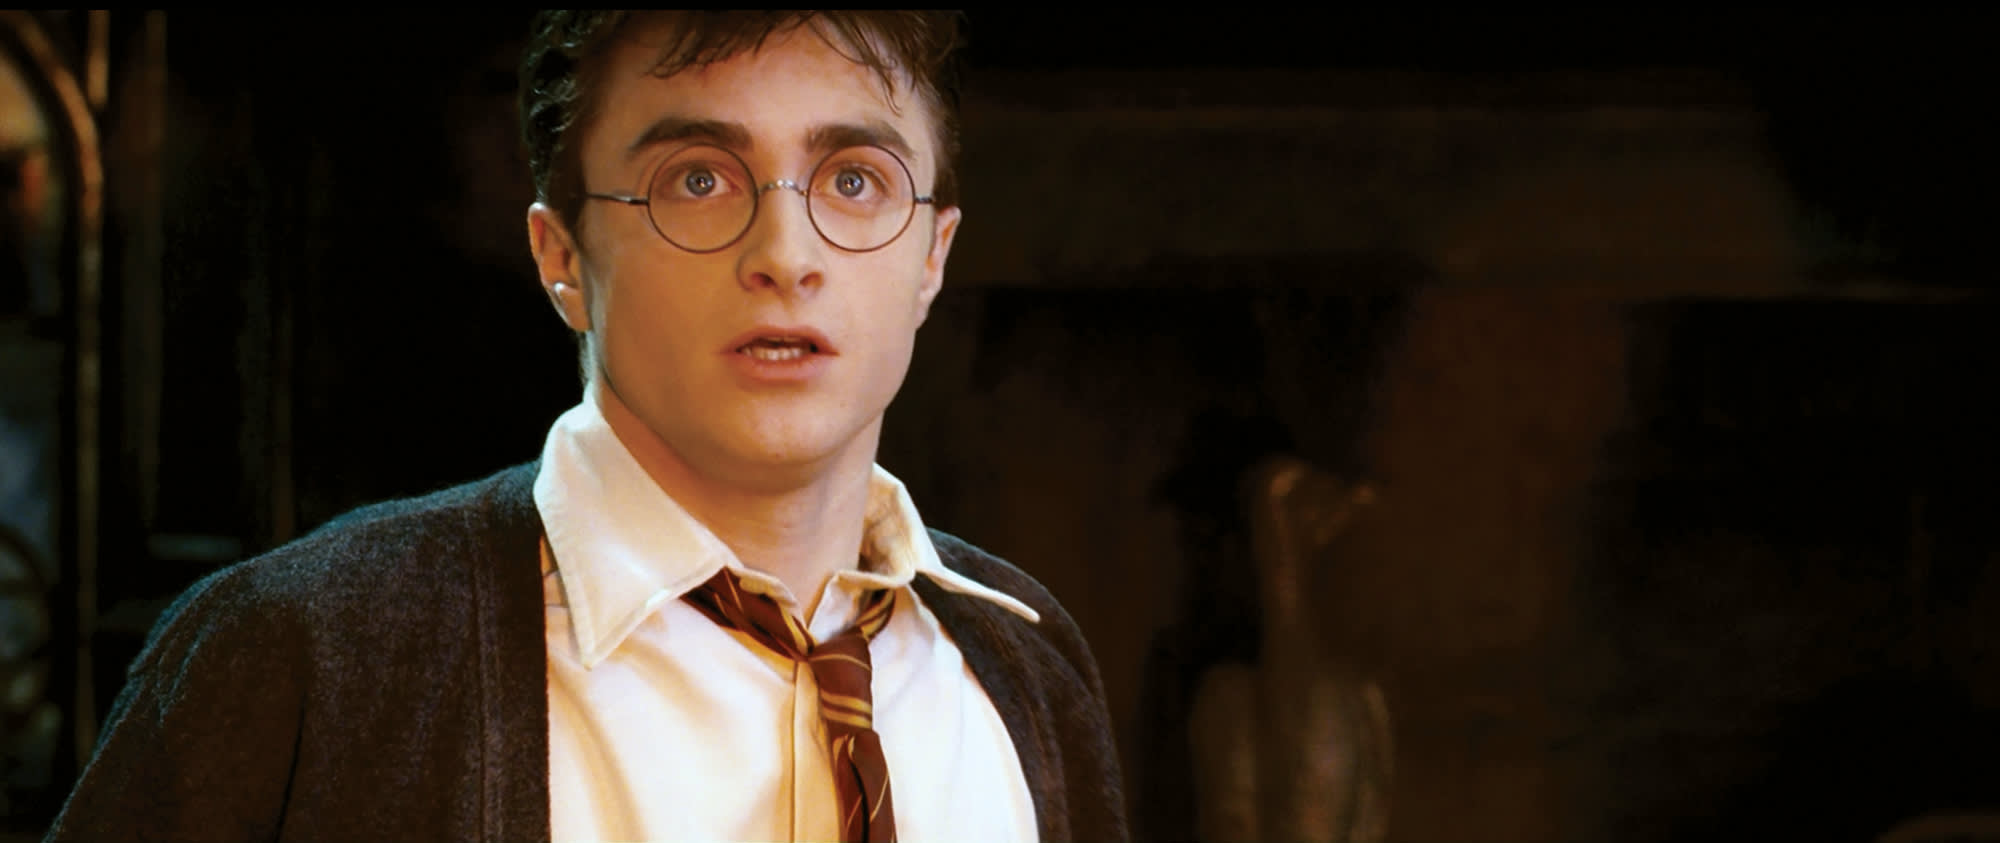 HP-F5-order-of-the-phoenix-harry-shocked-expression-web-landscape